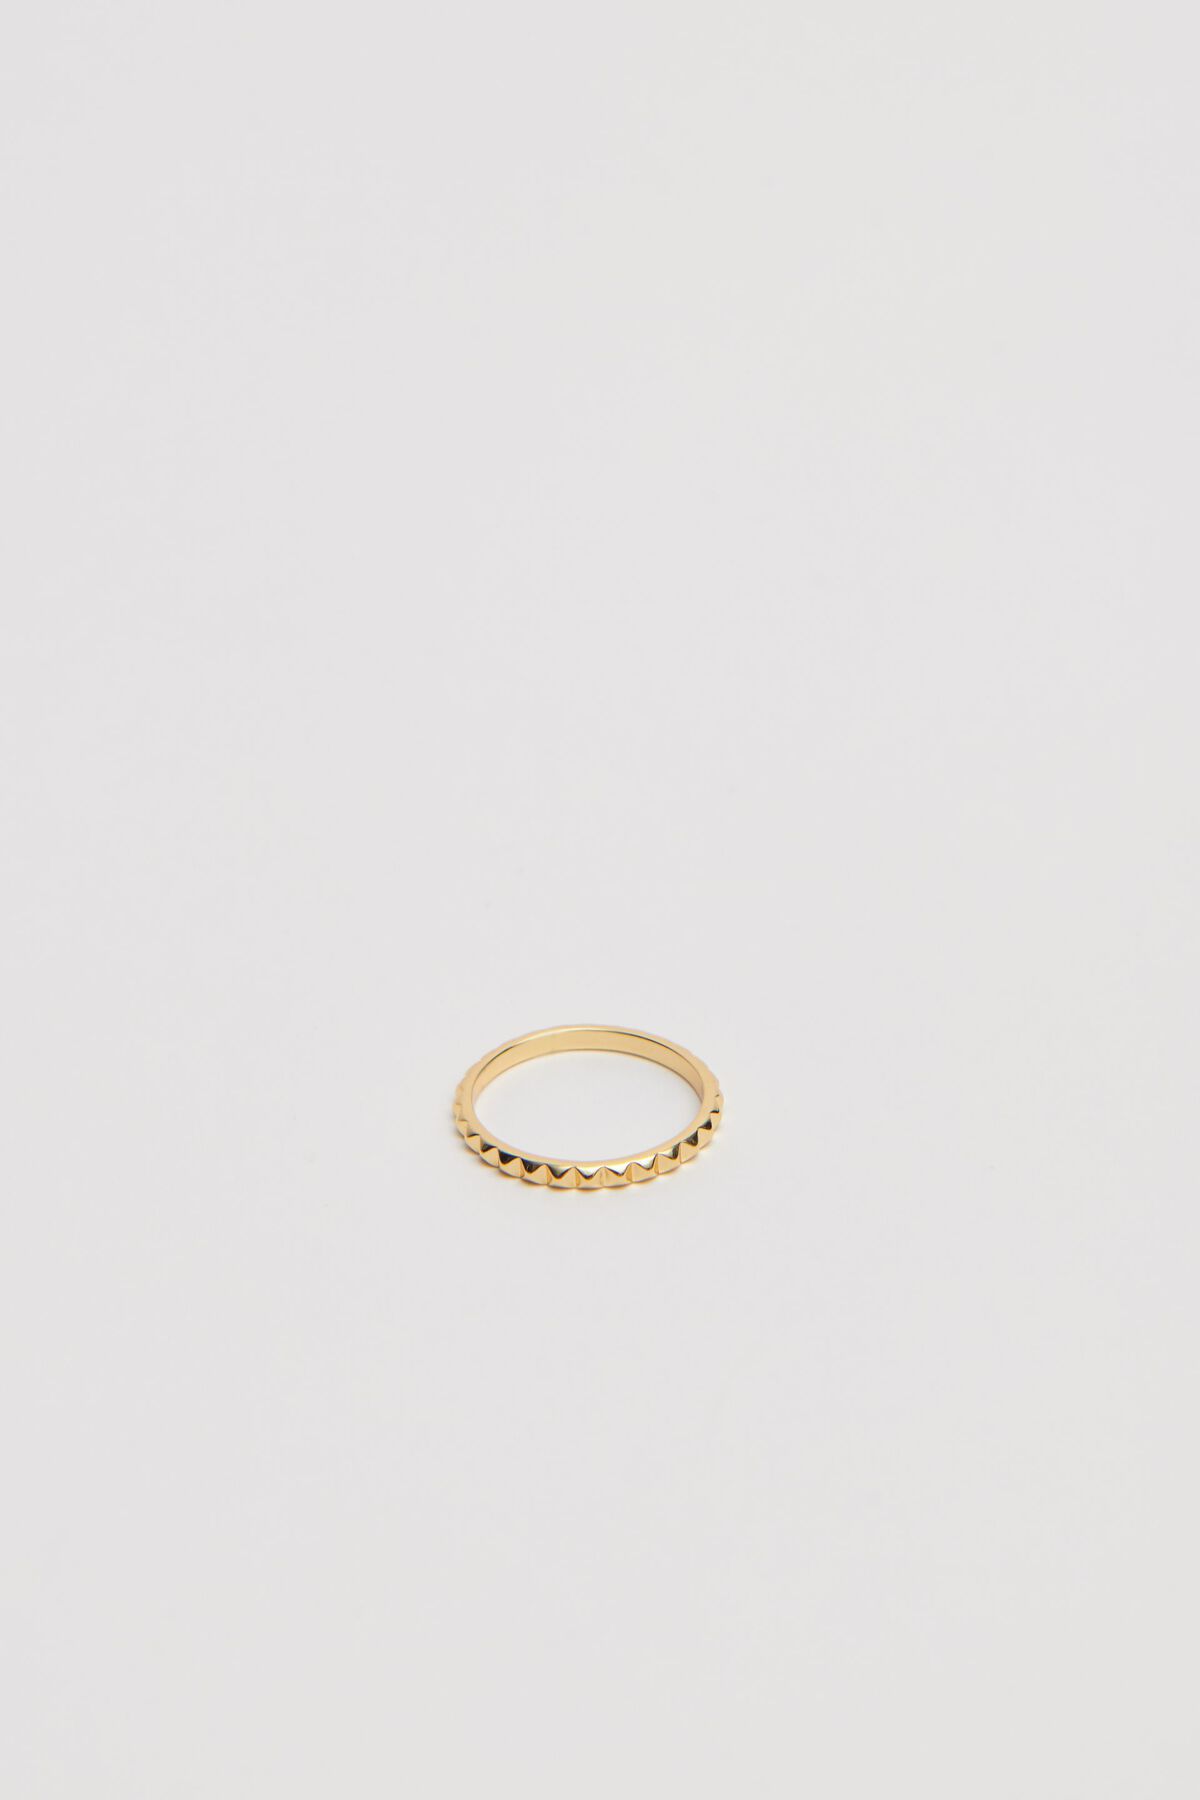 Garage 14K Gold Plated Micro Studded Ring. 3